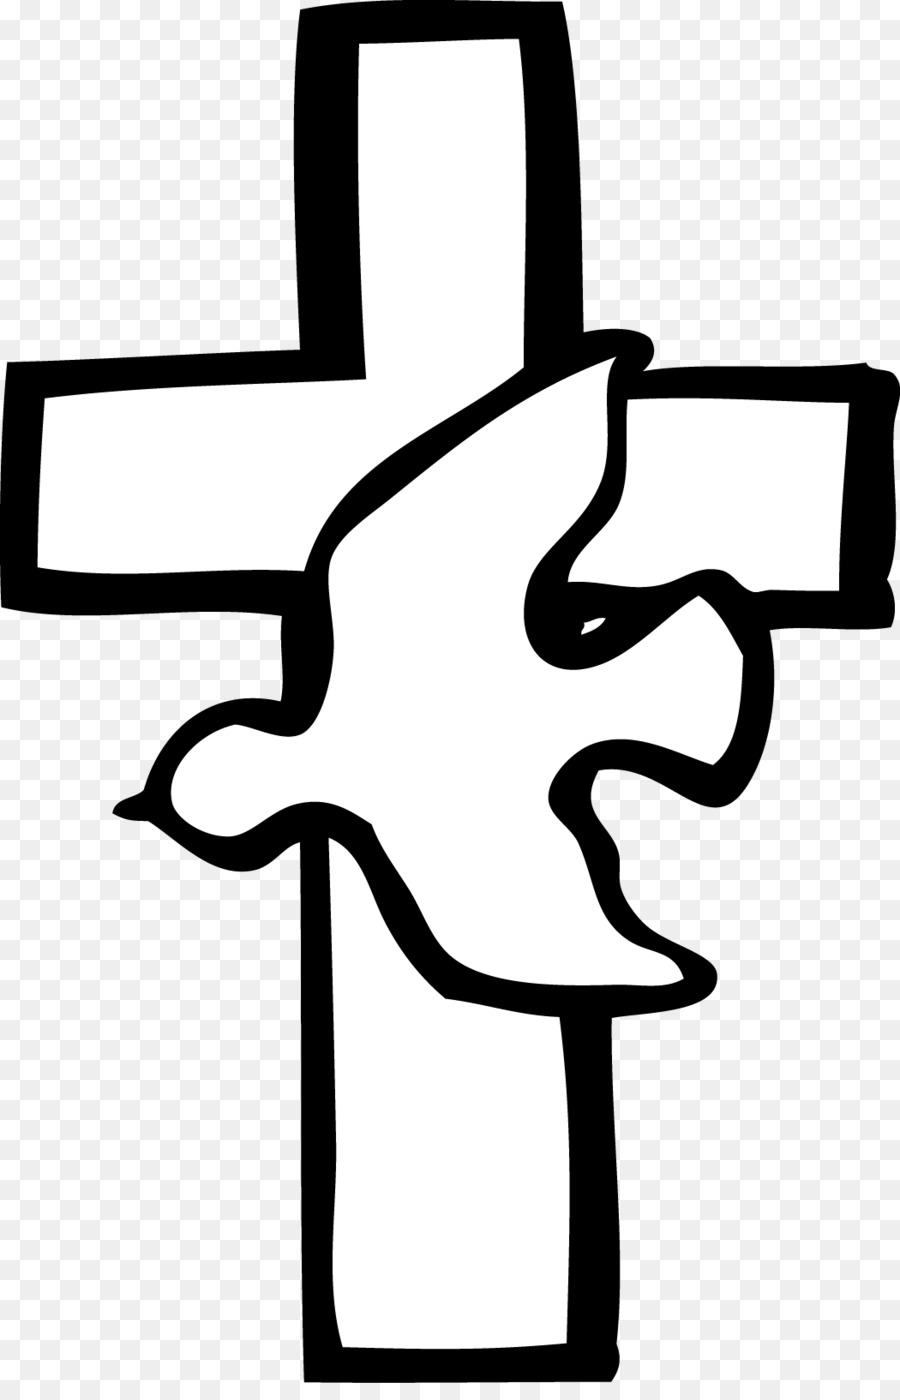 Catholic Church Catholicism First Communion Clip art - Iron Cross Cliparts png download - 1050*1614 - Free Transparent Catholic Church png Download.